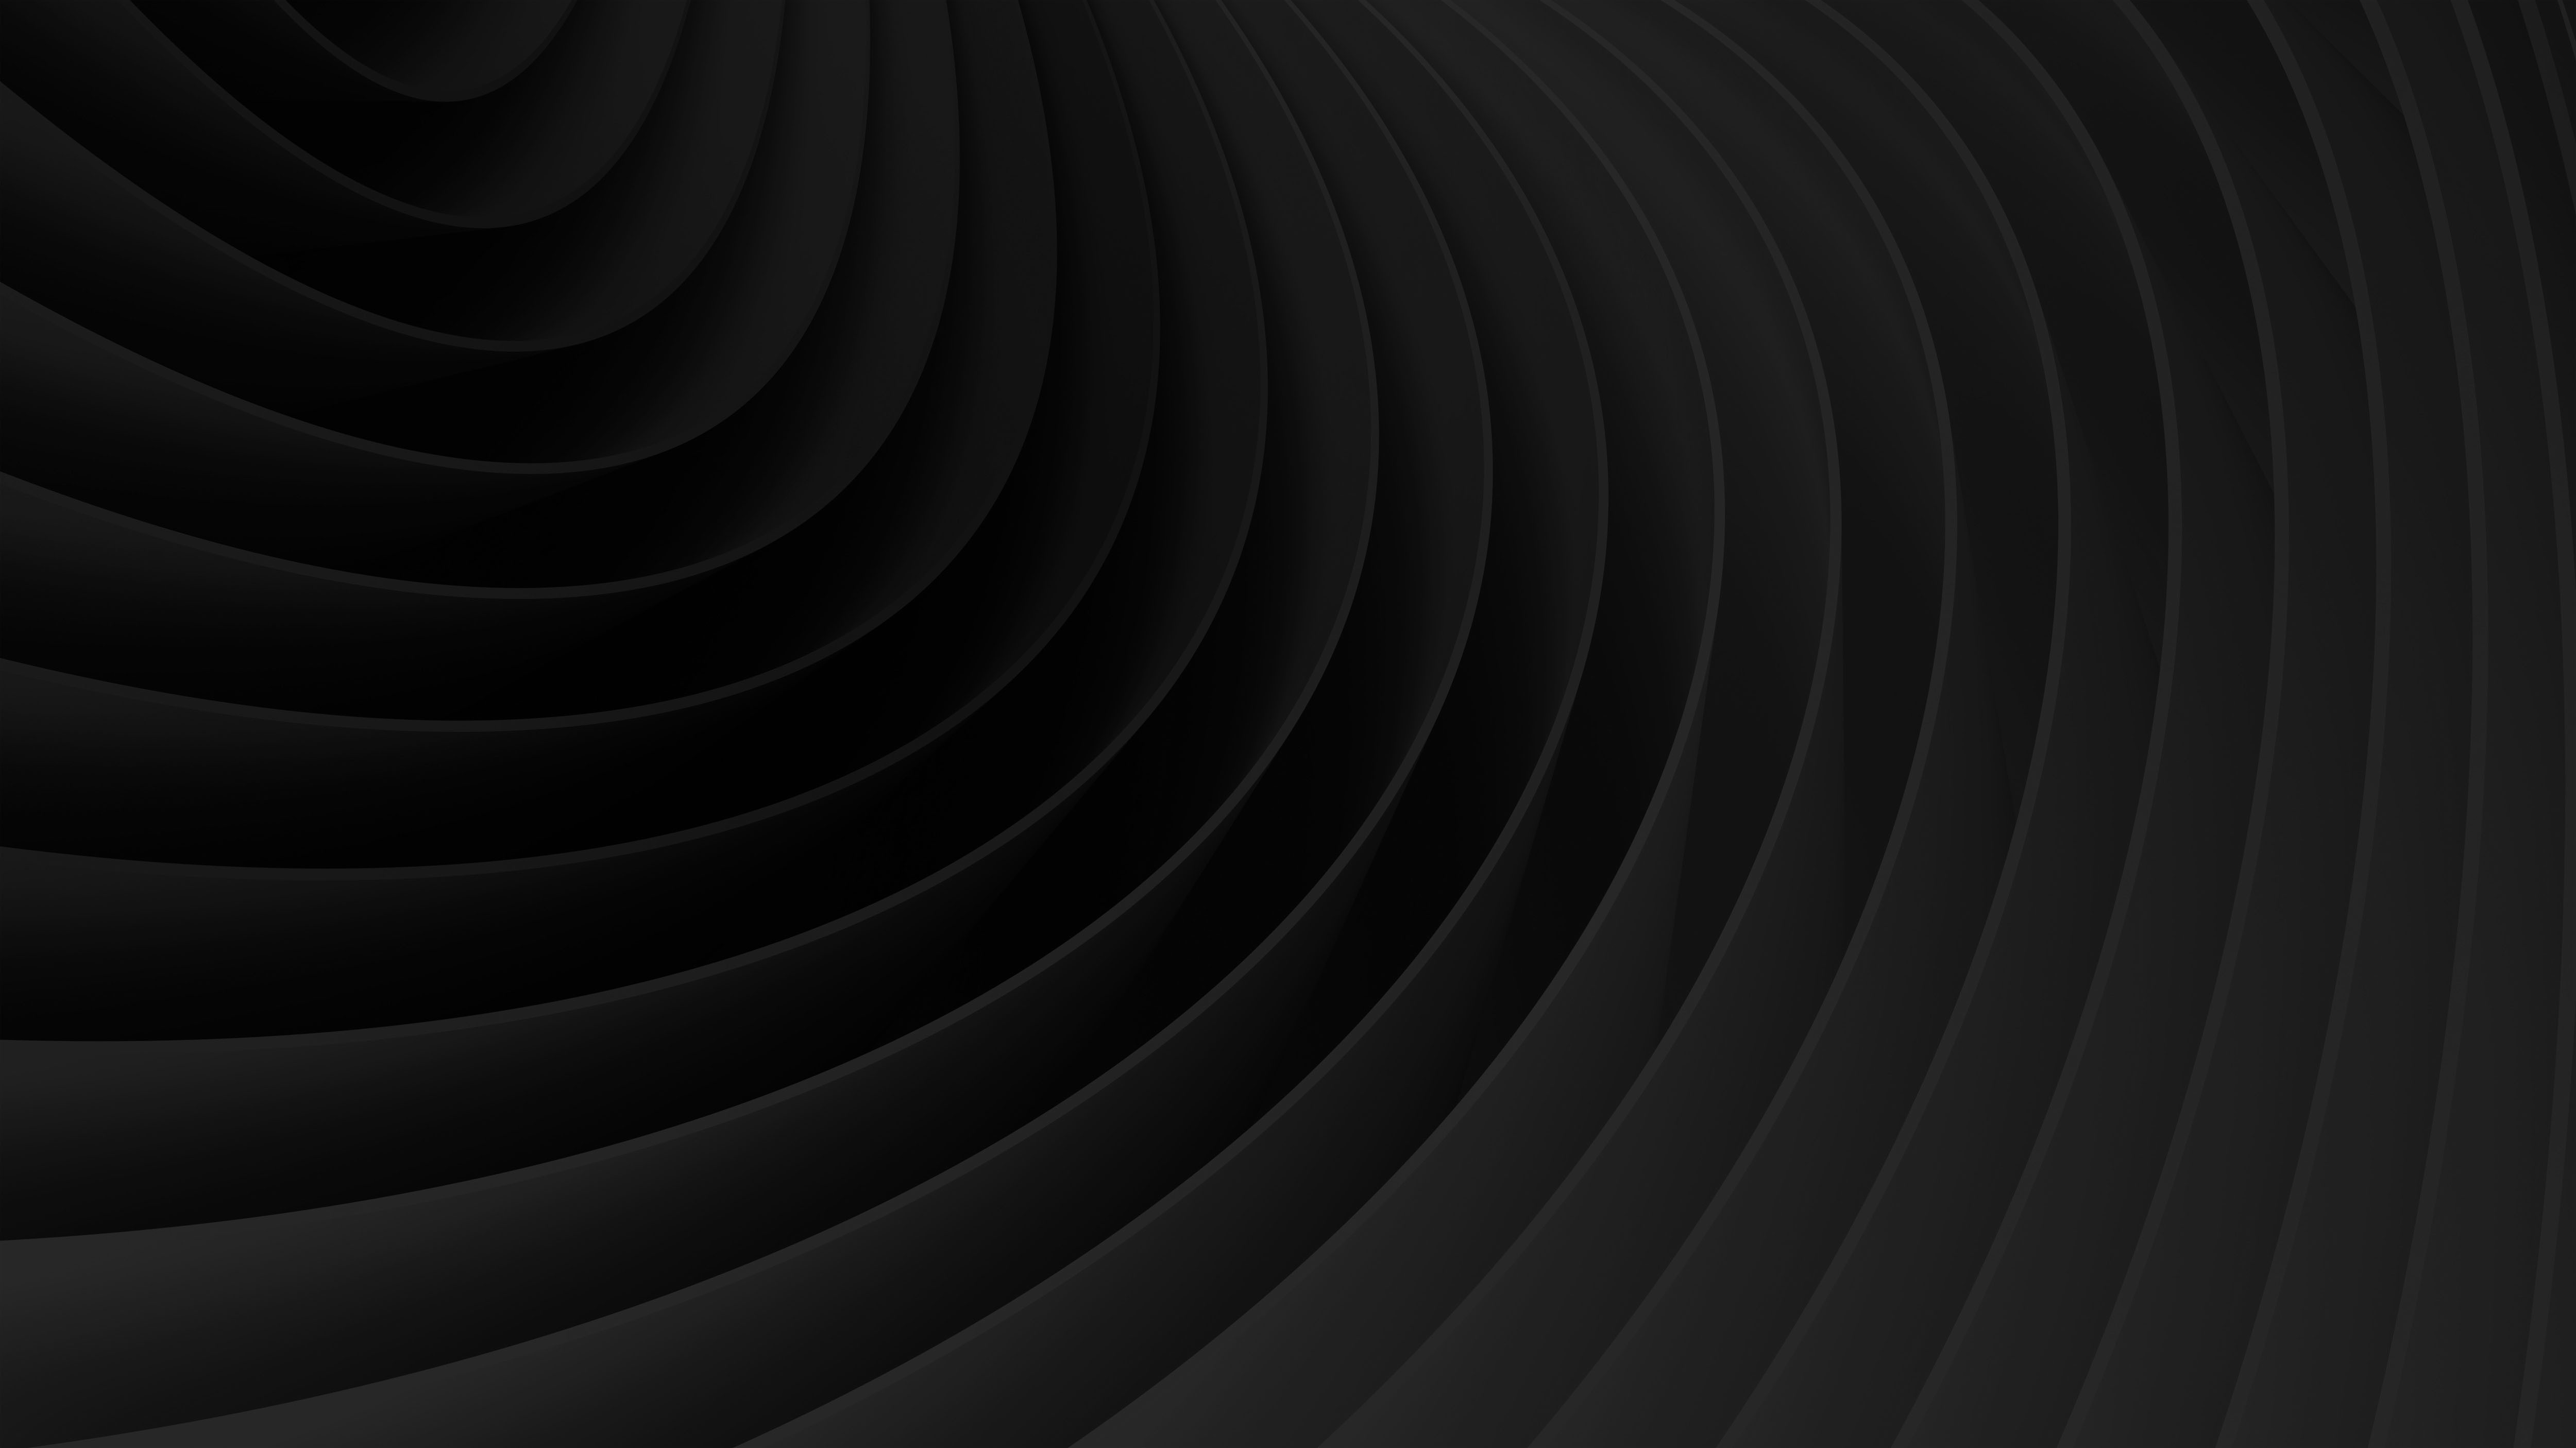 Wallpaper, digital art, abstract, 3D, minimalism, spiral, symmetry, simple, texture, circle, atmosphere, lines, vortex, light, wave, shape, line, darkness, computer wallpaper, black and white, monochrome photography, 5000x2811 px 5000x2811